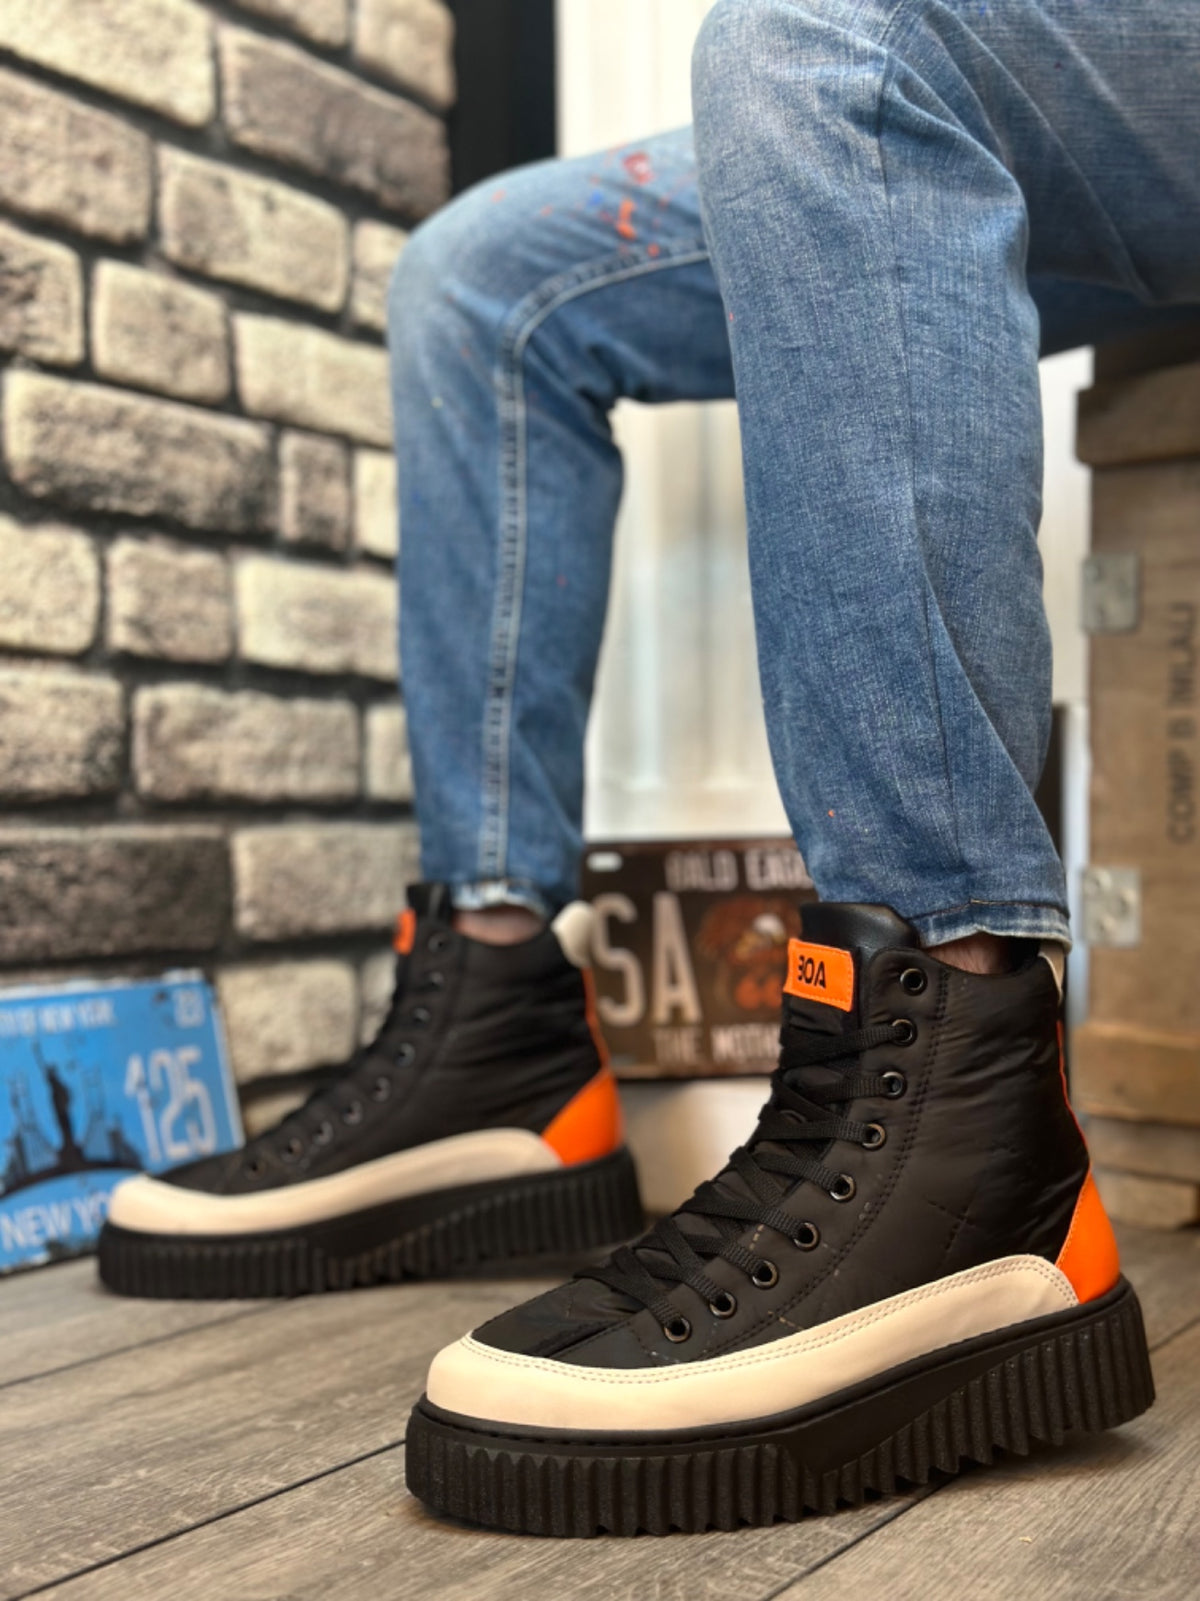 BA0811 High Black Sole Parachute Fabric Orange Skin Detailed Half Ankle Sports Boots - STREETMODE™